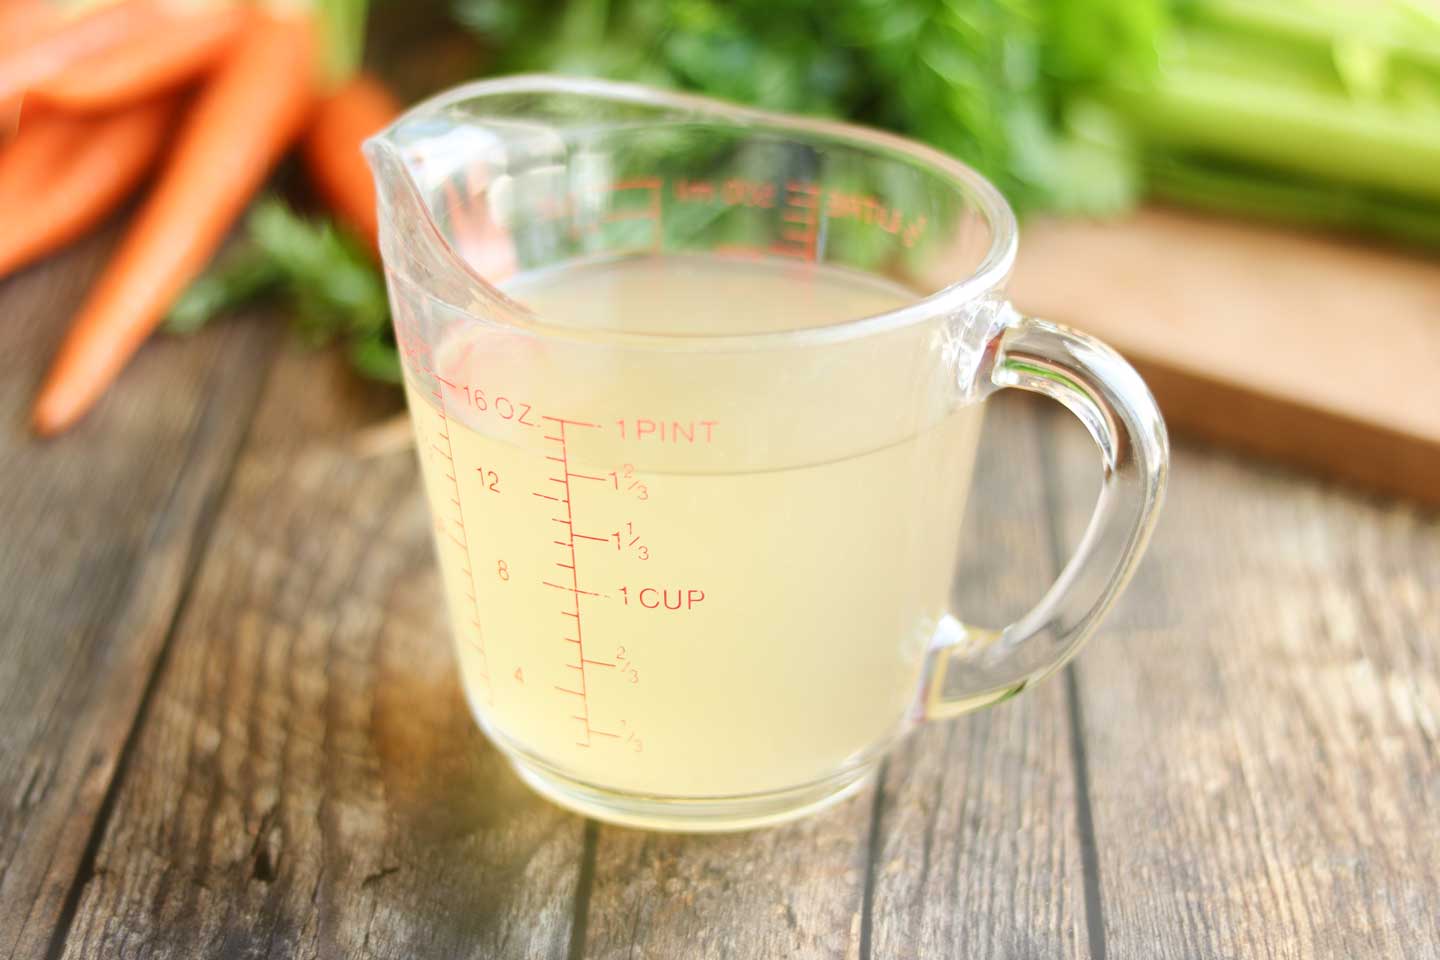 A 2-cup glass measuring cup full of chicken broth, with other ingredients in the background, ready to make this easy chicken noodle soup.